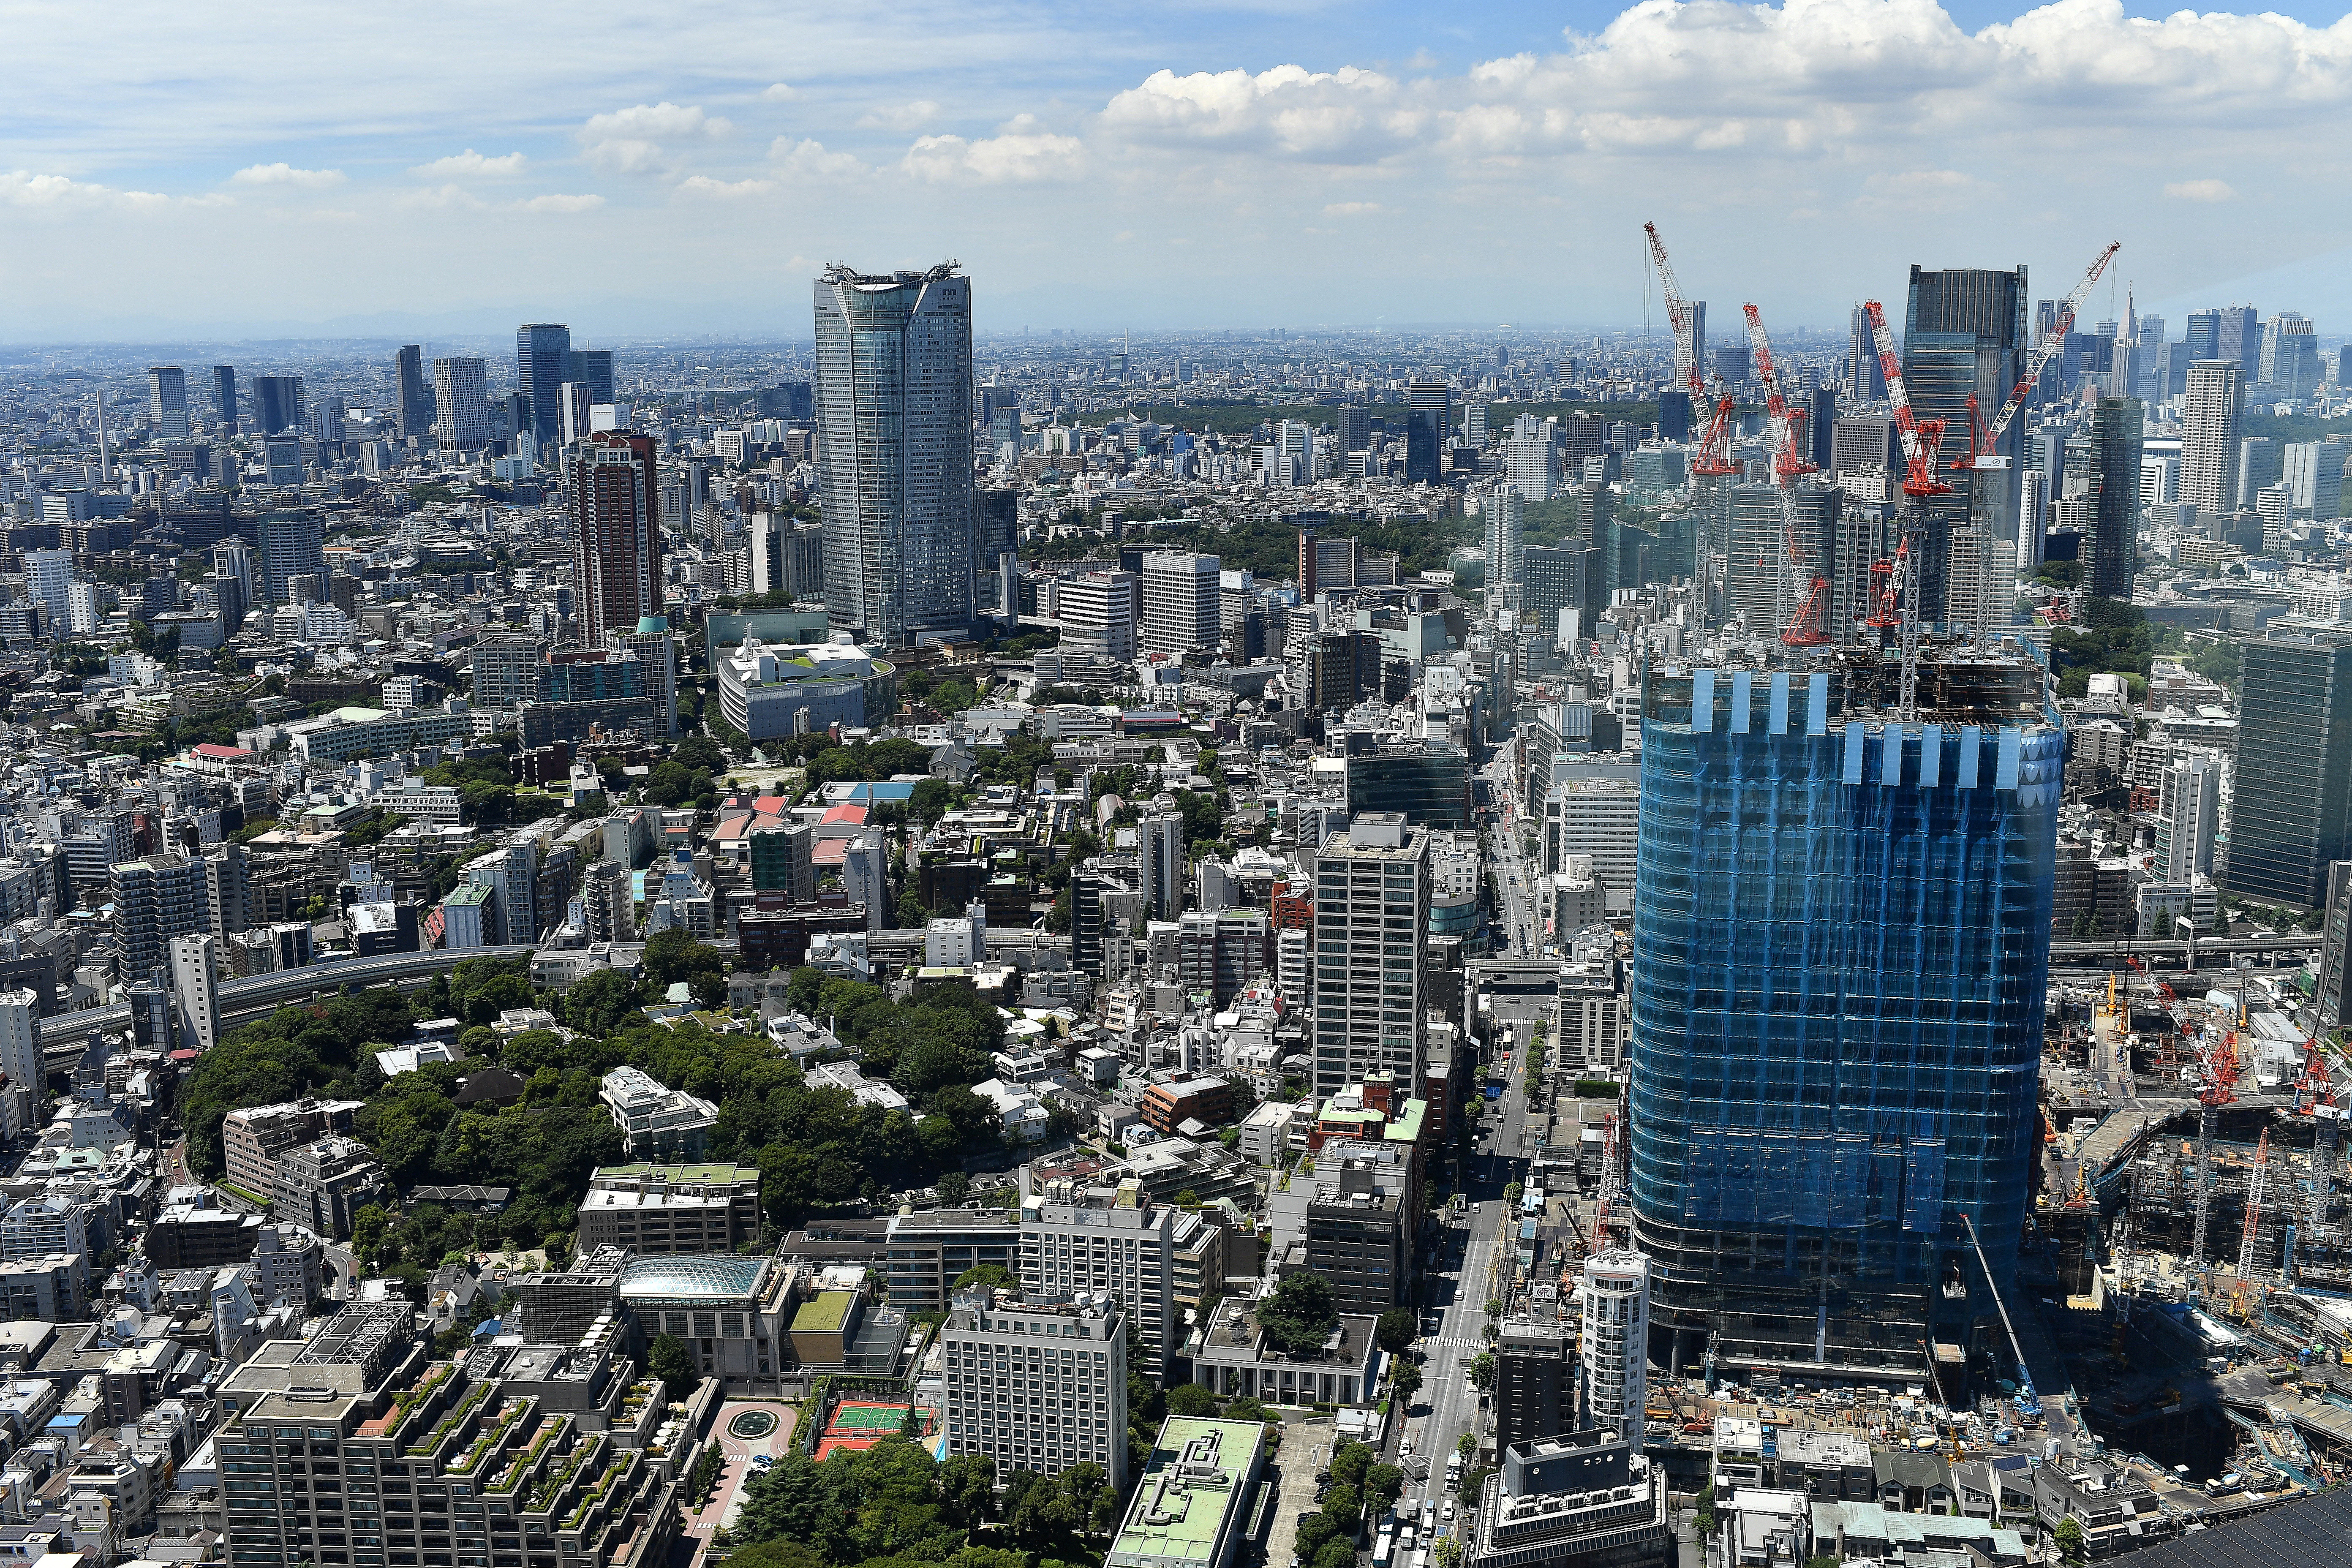 Buildings under construction are seen in a general view from Tokyo Tower of the city of Tokyo, Japan, August 6, 2021. Picture taken August 6, 2021. REUTERS/Clodagh Kilcoyne